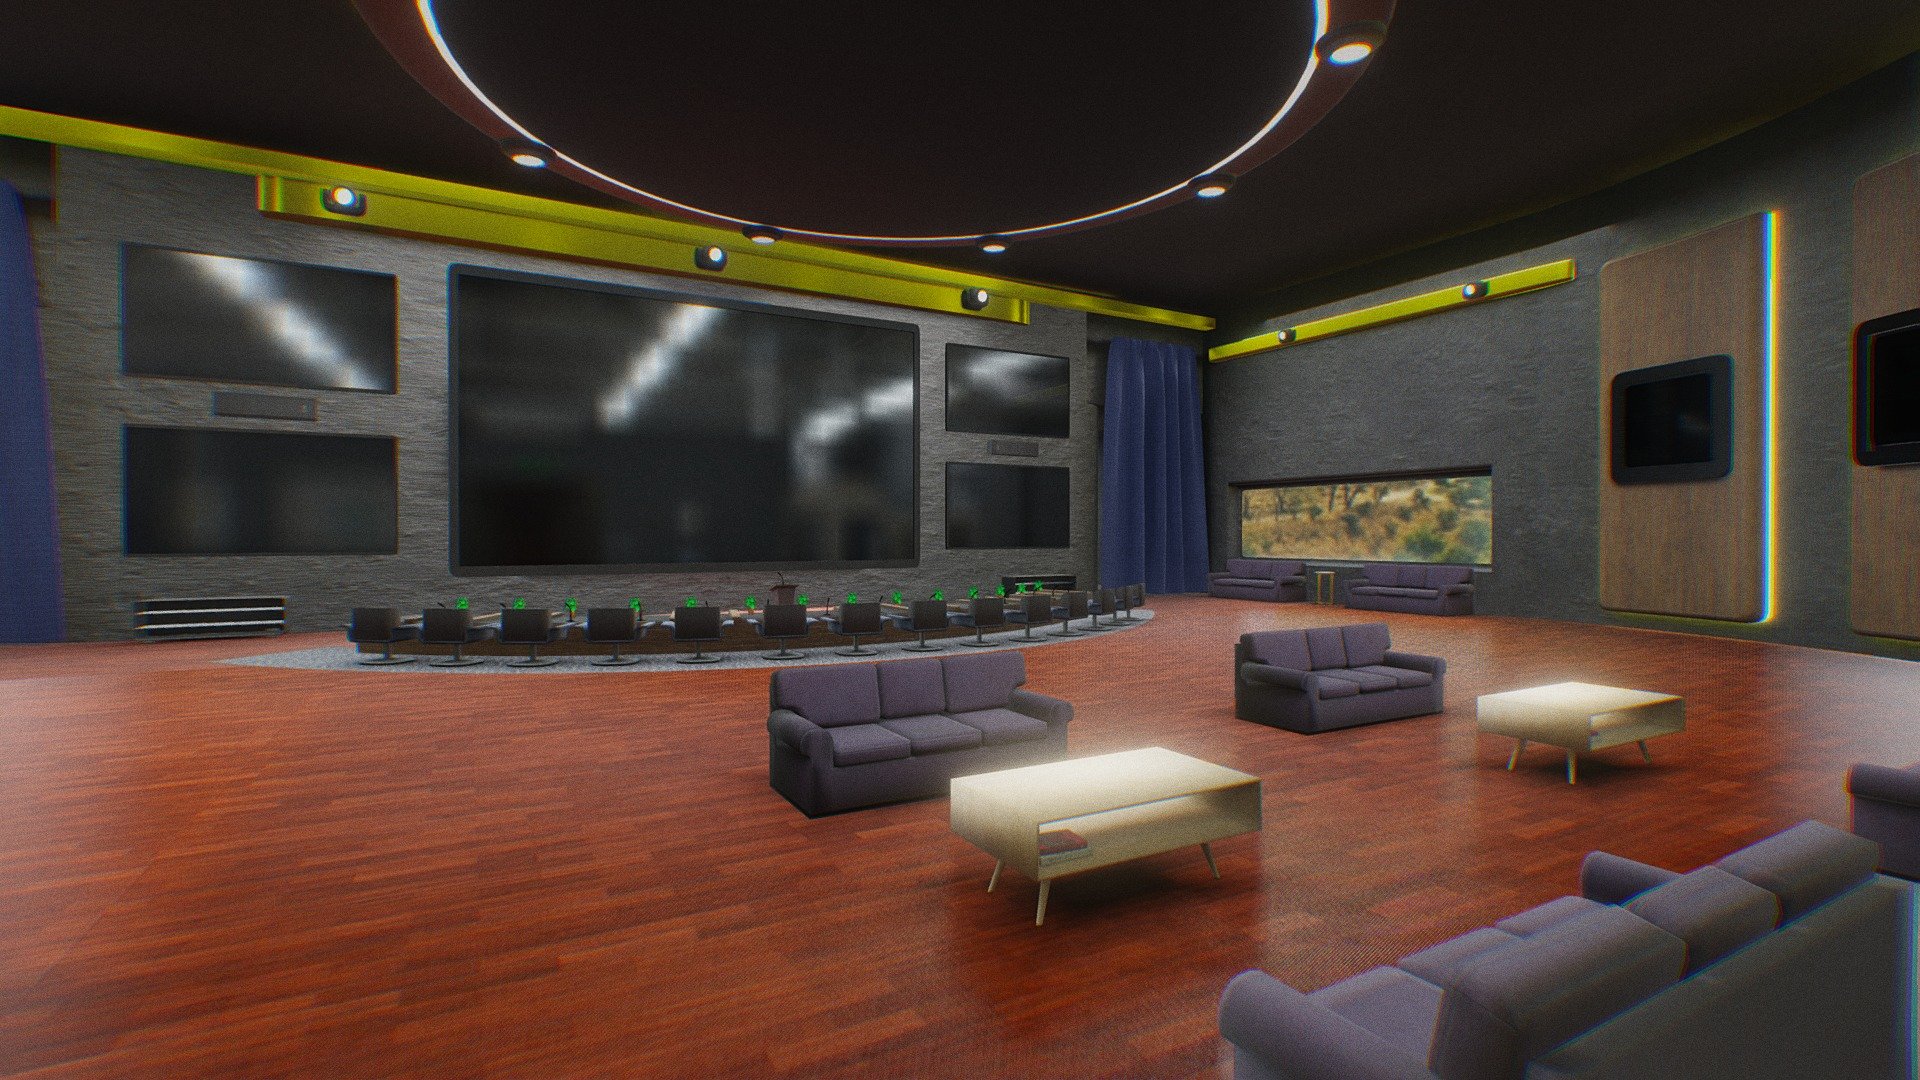 This is an office created especially for virtual spaces, metaverse, conferences, product sales, among other functions, with large spaces and screens to show your best ideas in the digital world.
contact. marco.virtual.mx@gmail.com

https://marcovirtual-mx.com/ - Metaverse Room Virtual augmented Reality - Buy Royalty Free 3D model by Marco Virtual MX (@marco_virtual) 3d model